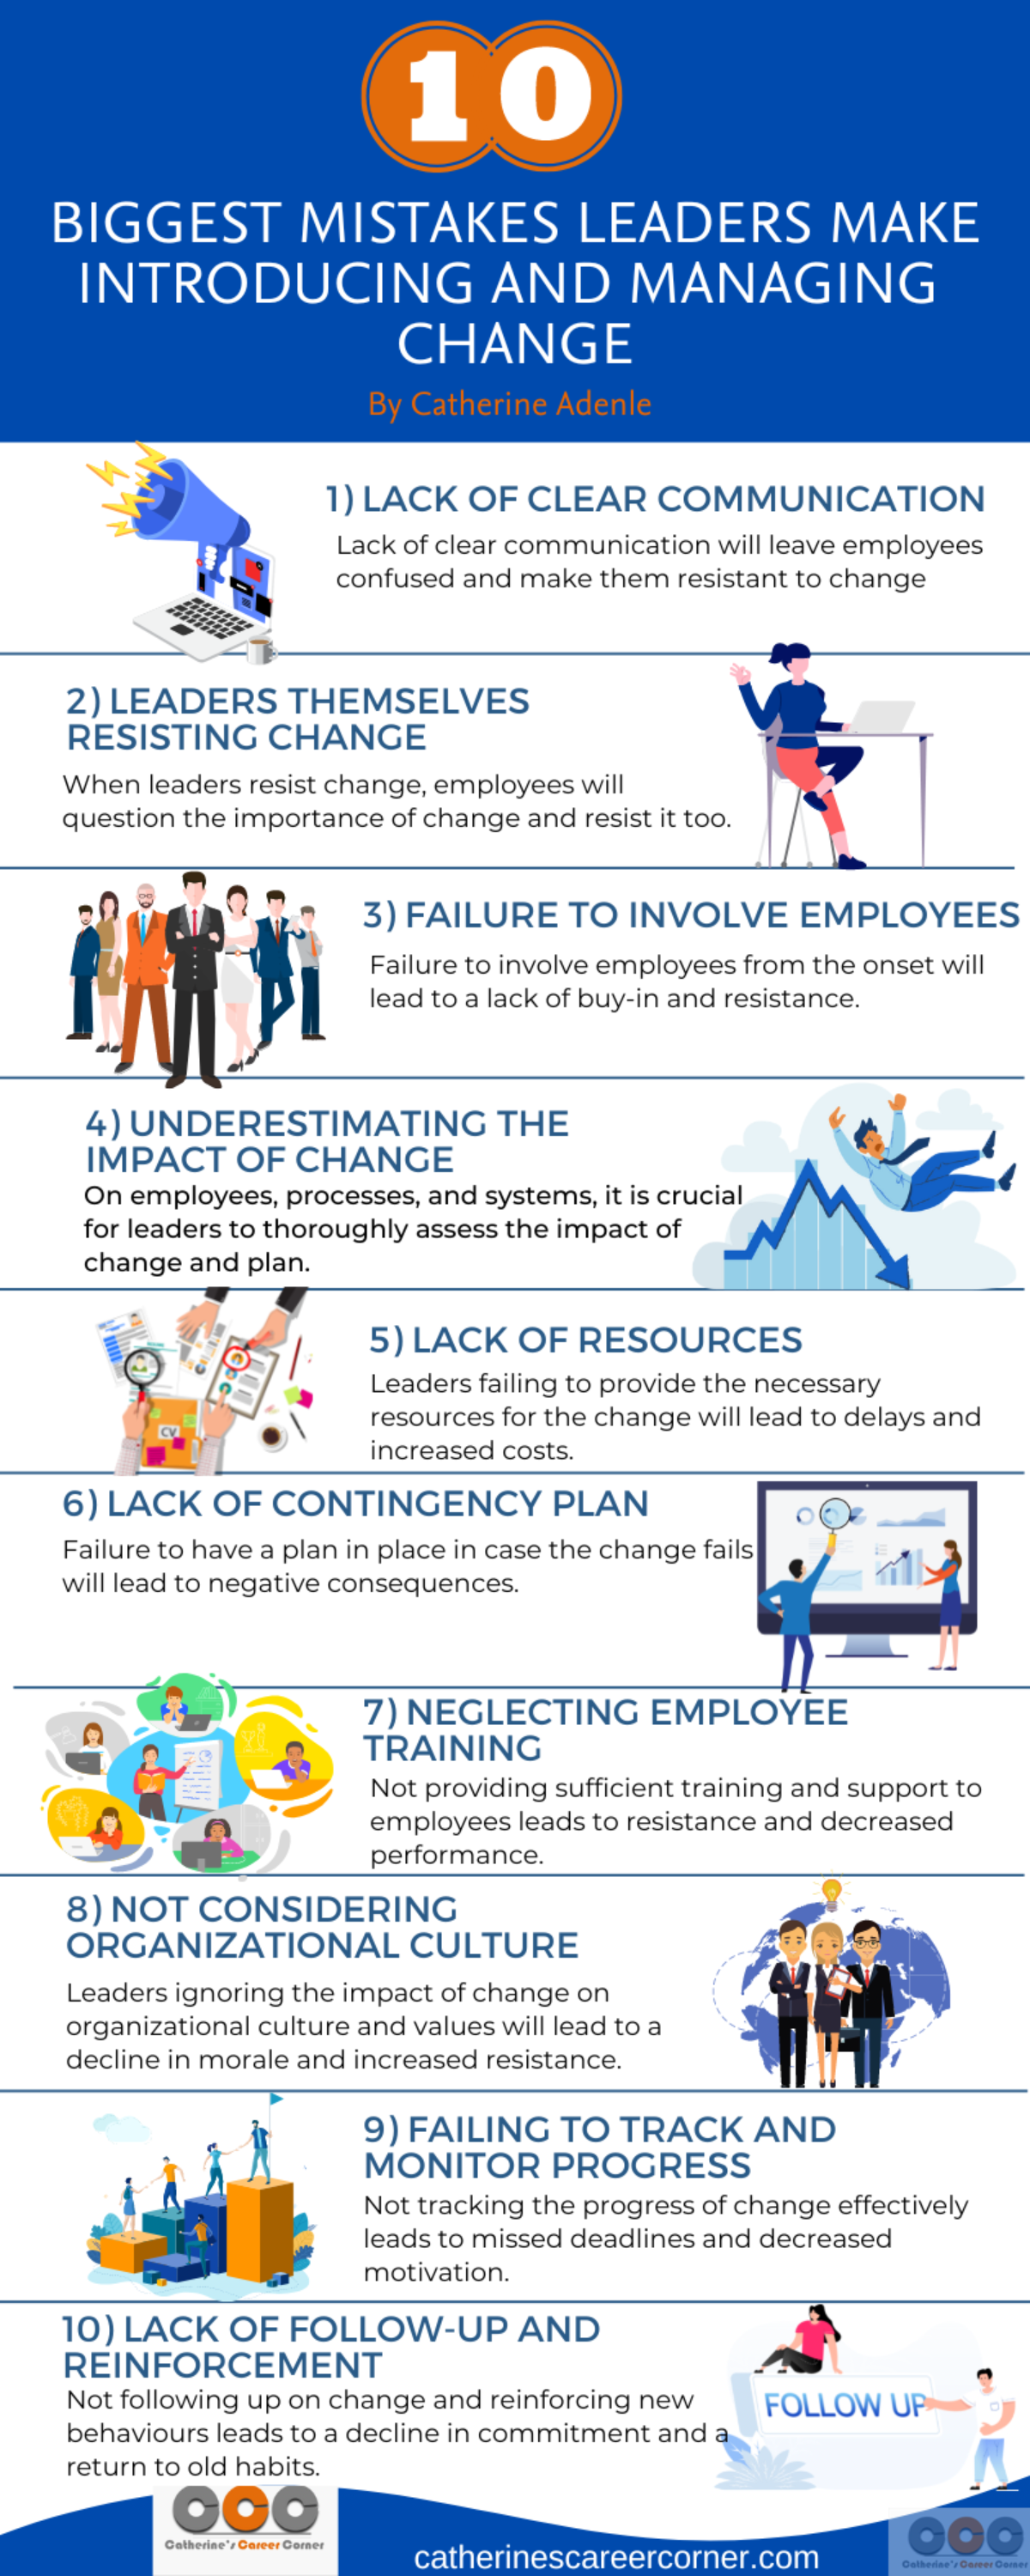 8 Tips To Handle Mistakes At Work - Admitting To Mistakes